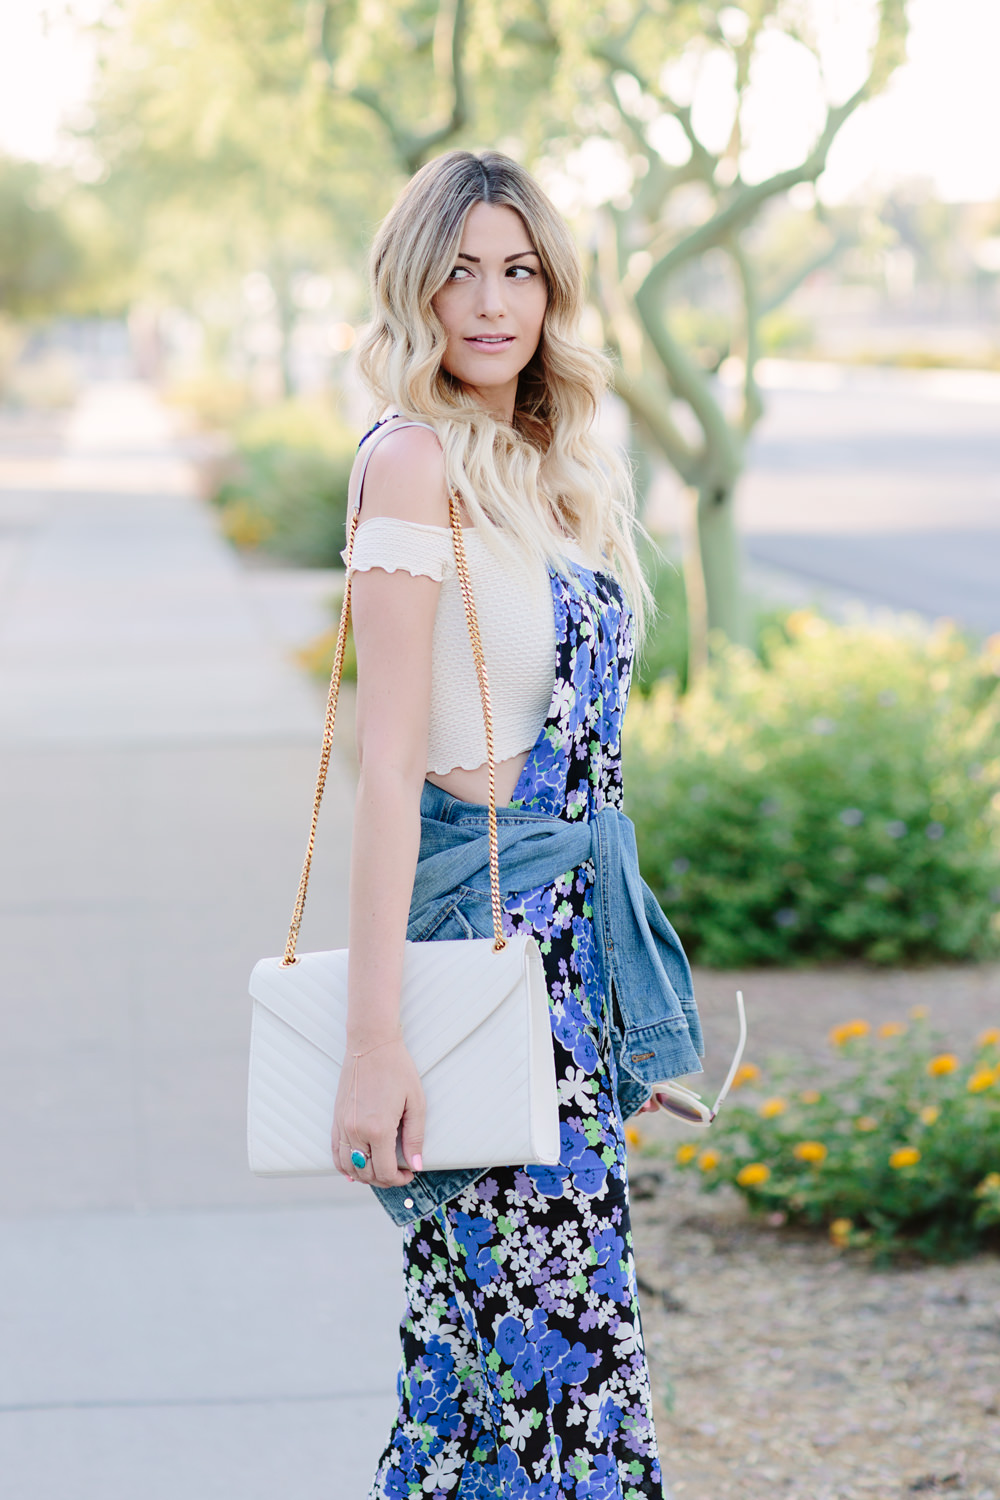 Dash of Darling styles a Wildfox blue bouquet overalls floral jumpsuit for summer with a denim jacket, ysl bag and an off the shoulder top.